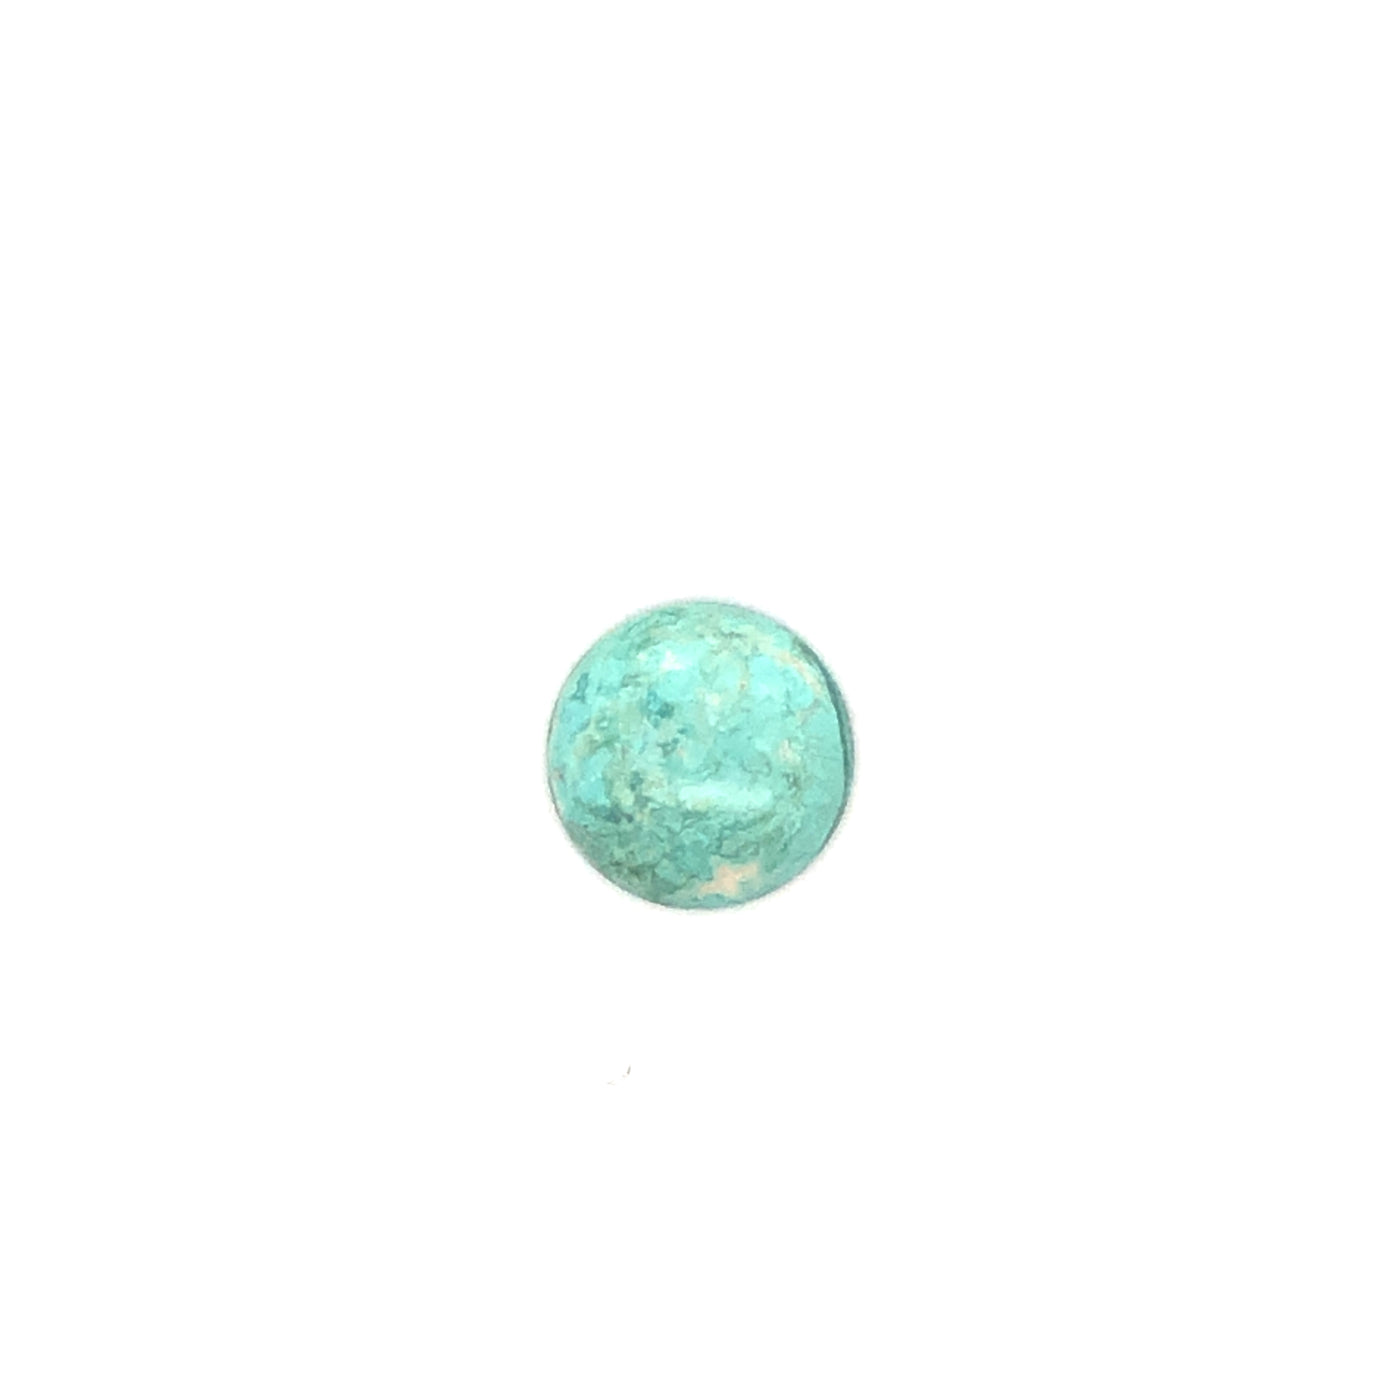 Loose Narooma Turquoise Round Shaped 5.67Ct Blue